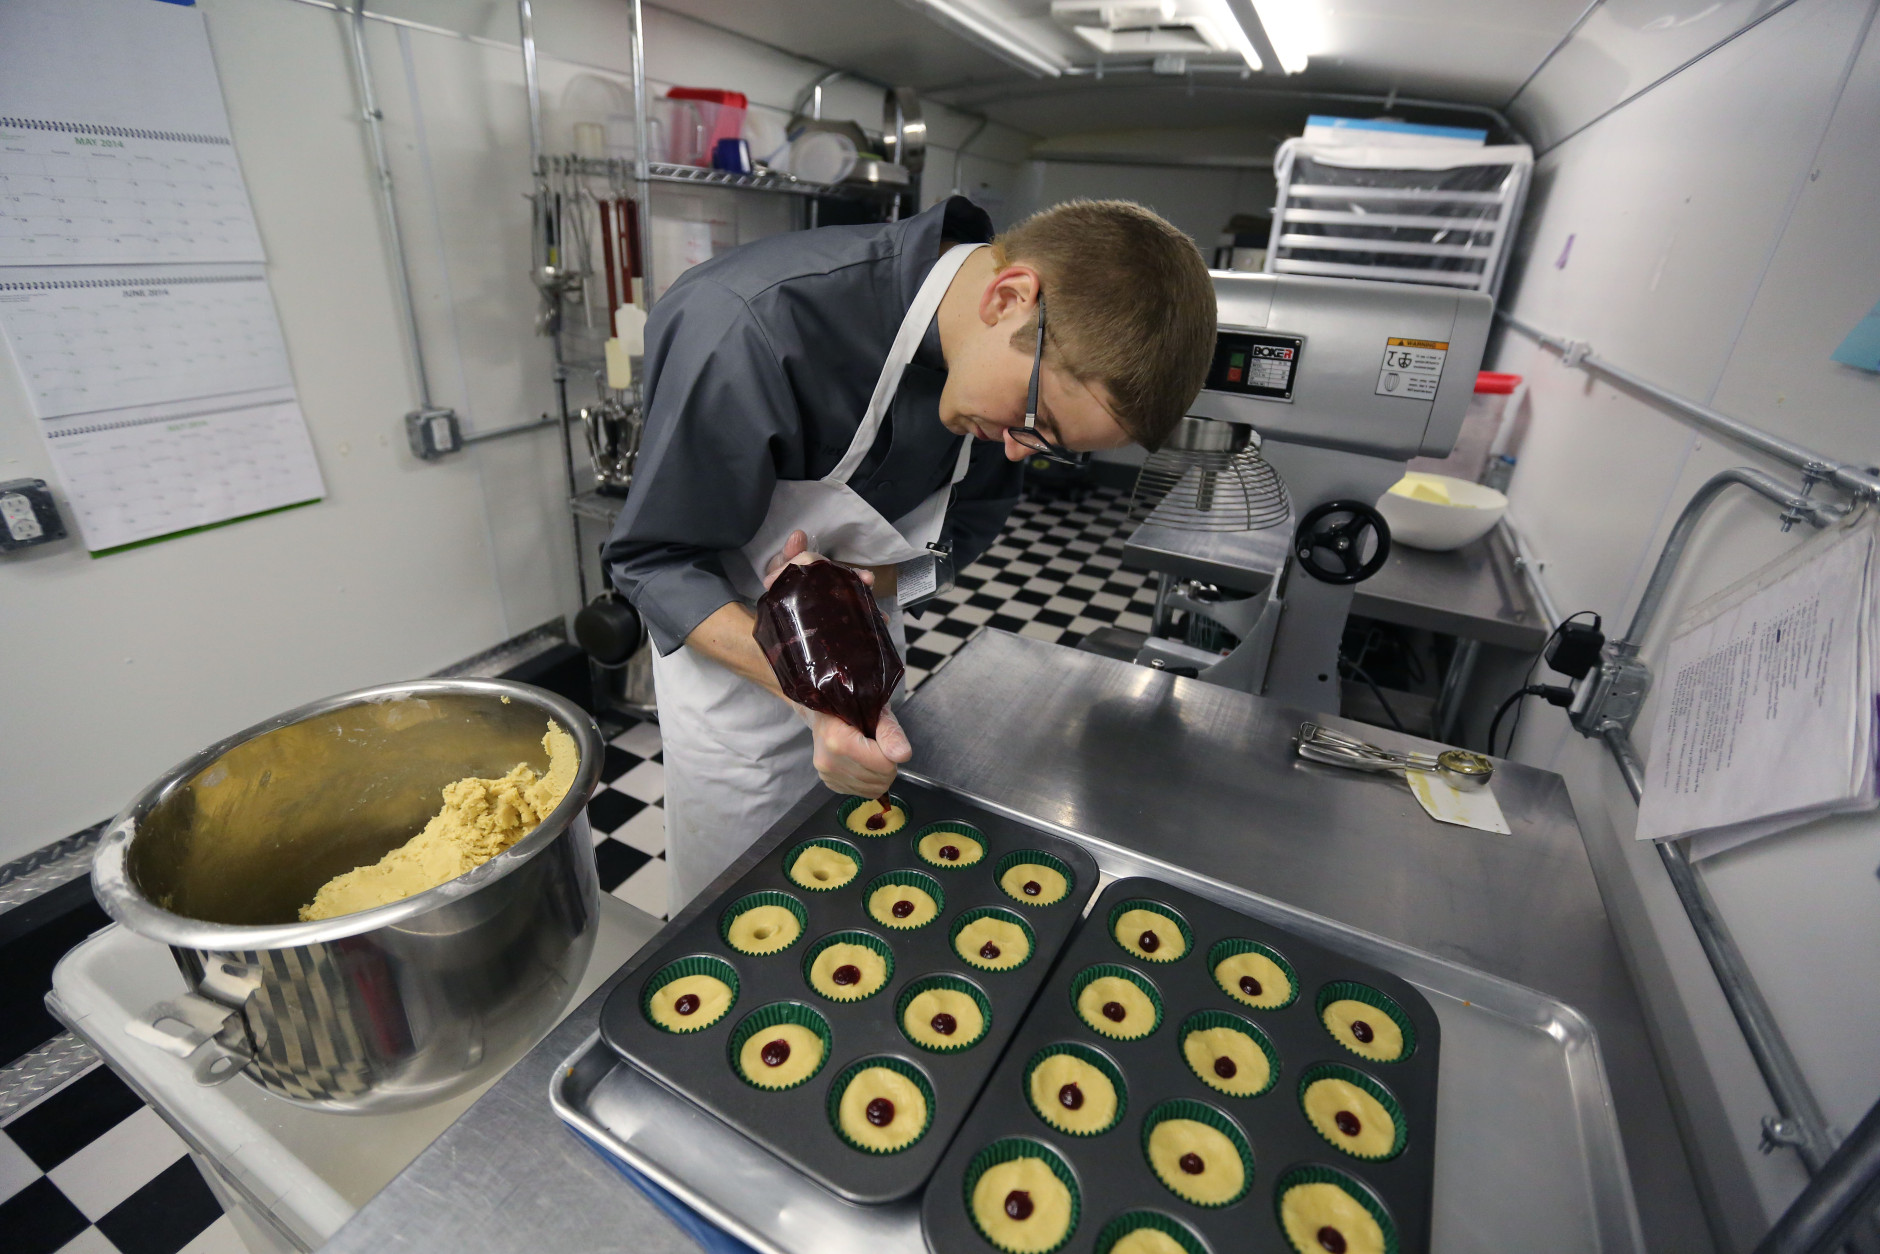 In this June 19, 2014 photo, chef Alex Tretter adds strawberry jam to cannabis-infused peanut butter and jelly cups before baking them, at Sweet Grass Kitchen, a well-established gourmet marijuana edibles bakery which sells its confections to retail outlets, in Denver. Sweet Grass Kitchen, like other cannabis food producers in the state, is held to rigorous health inspection standards, and has received praise from inspectors, according to owner Julie Berliner. (AP Photo/Brennan Linsley)